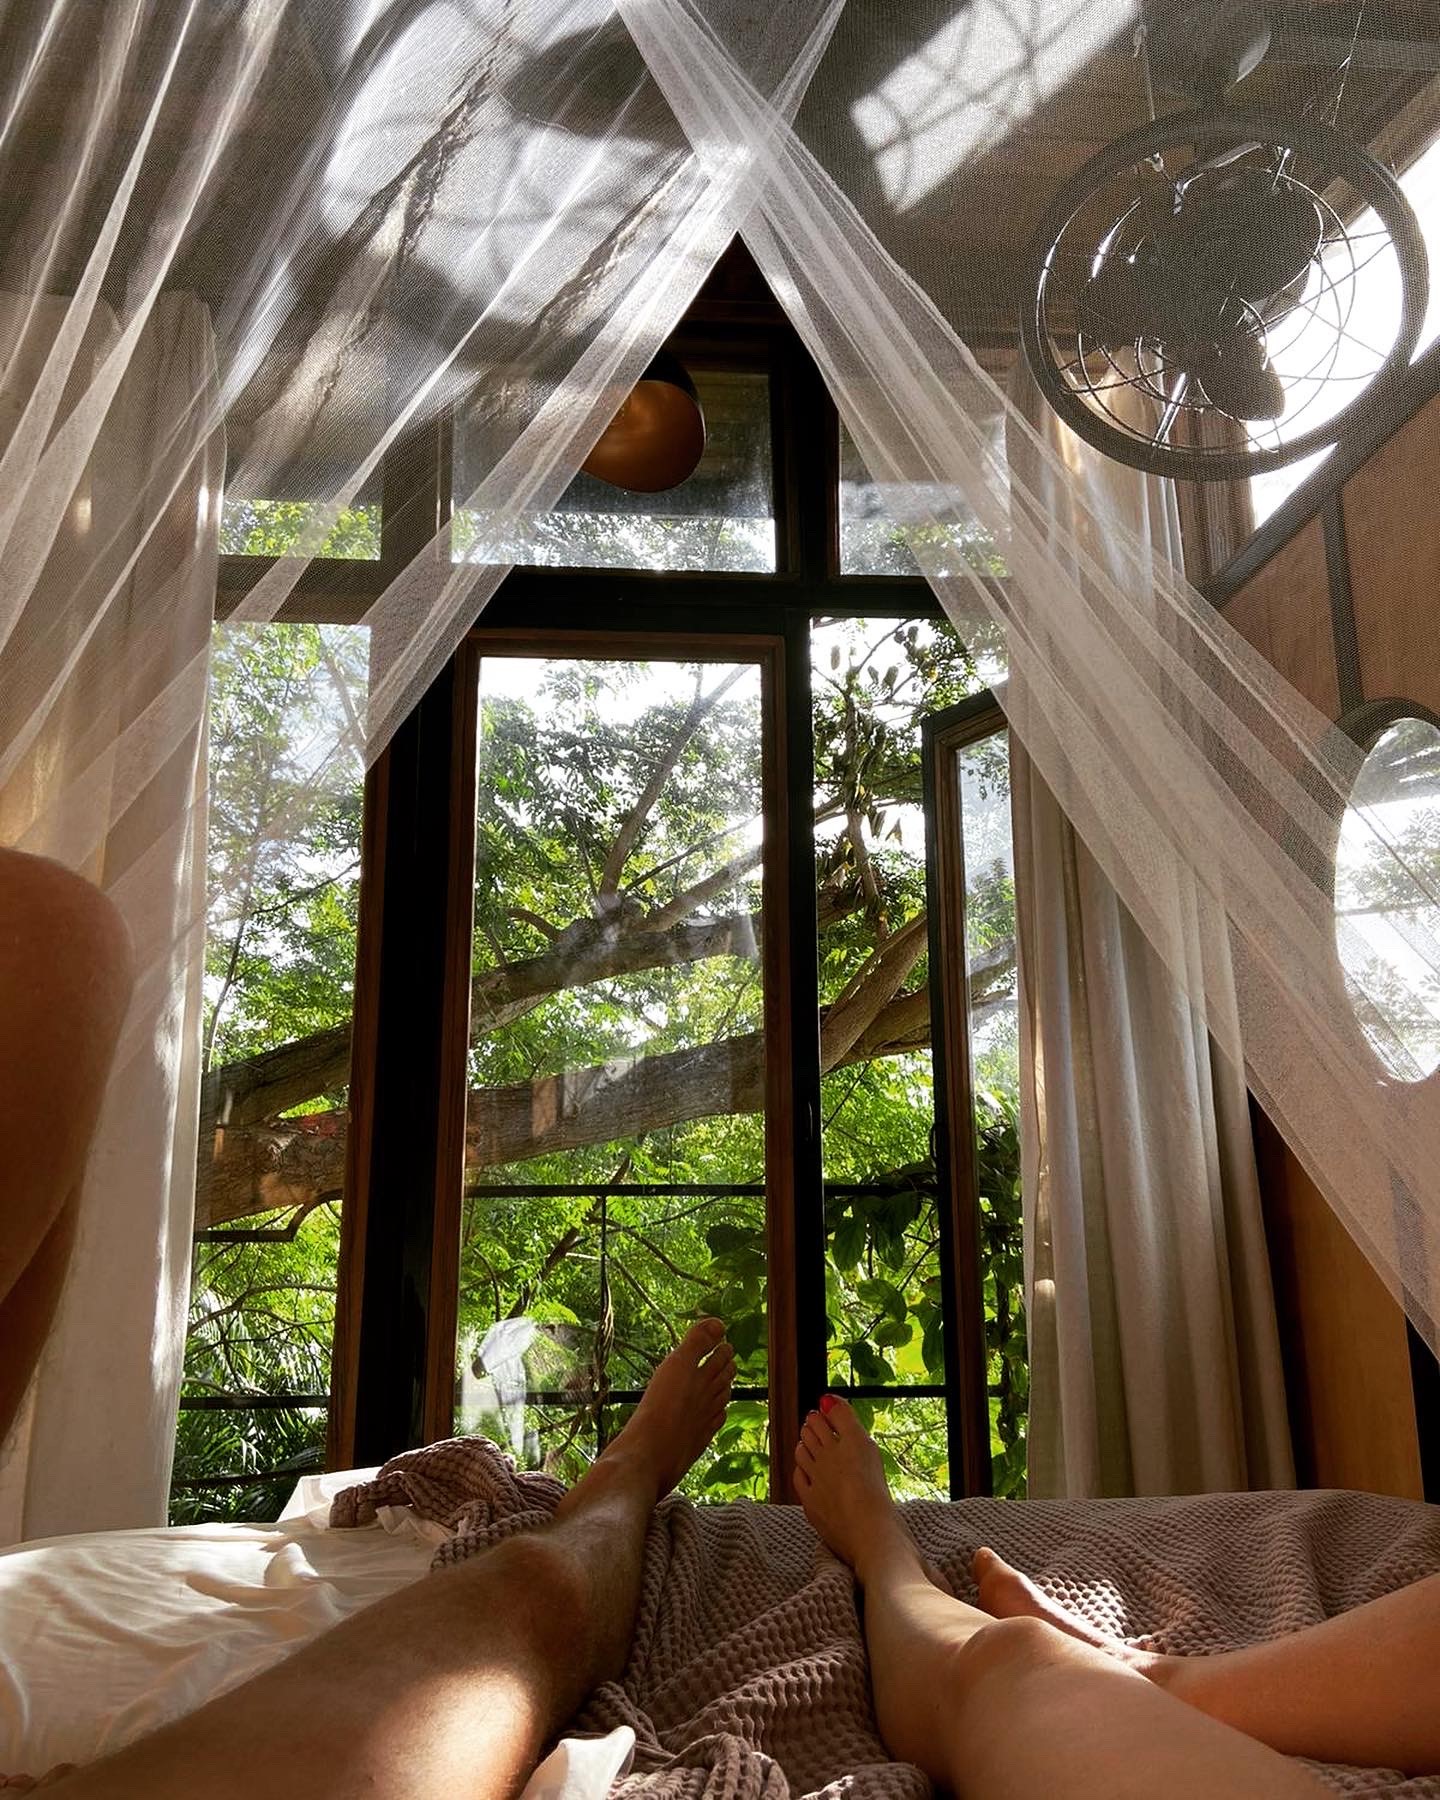 Jungle Tree Casa Escape Our tree house at Finca Victoria, the perfect spot to check in and check out